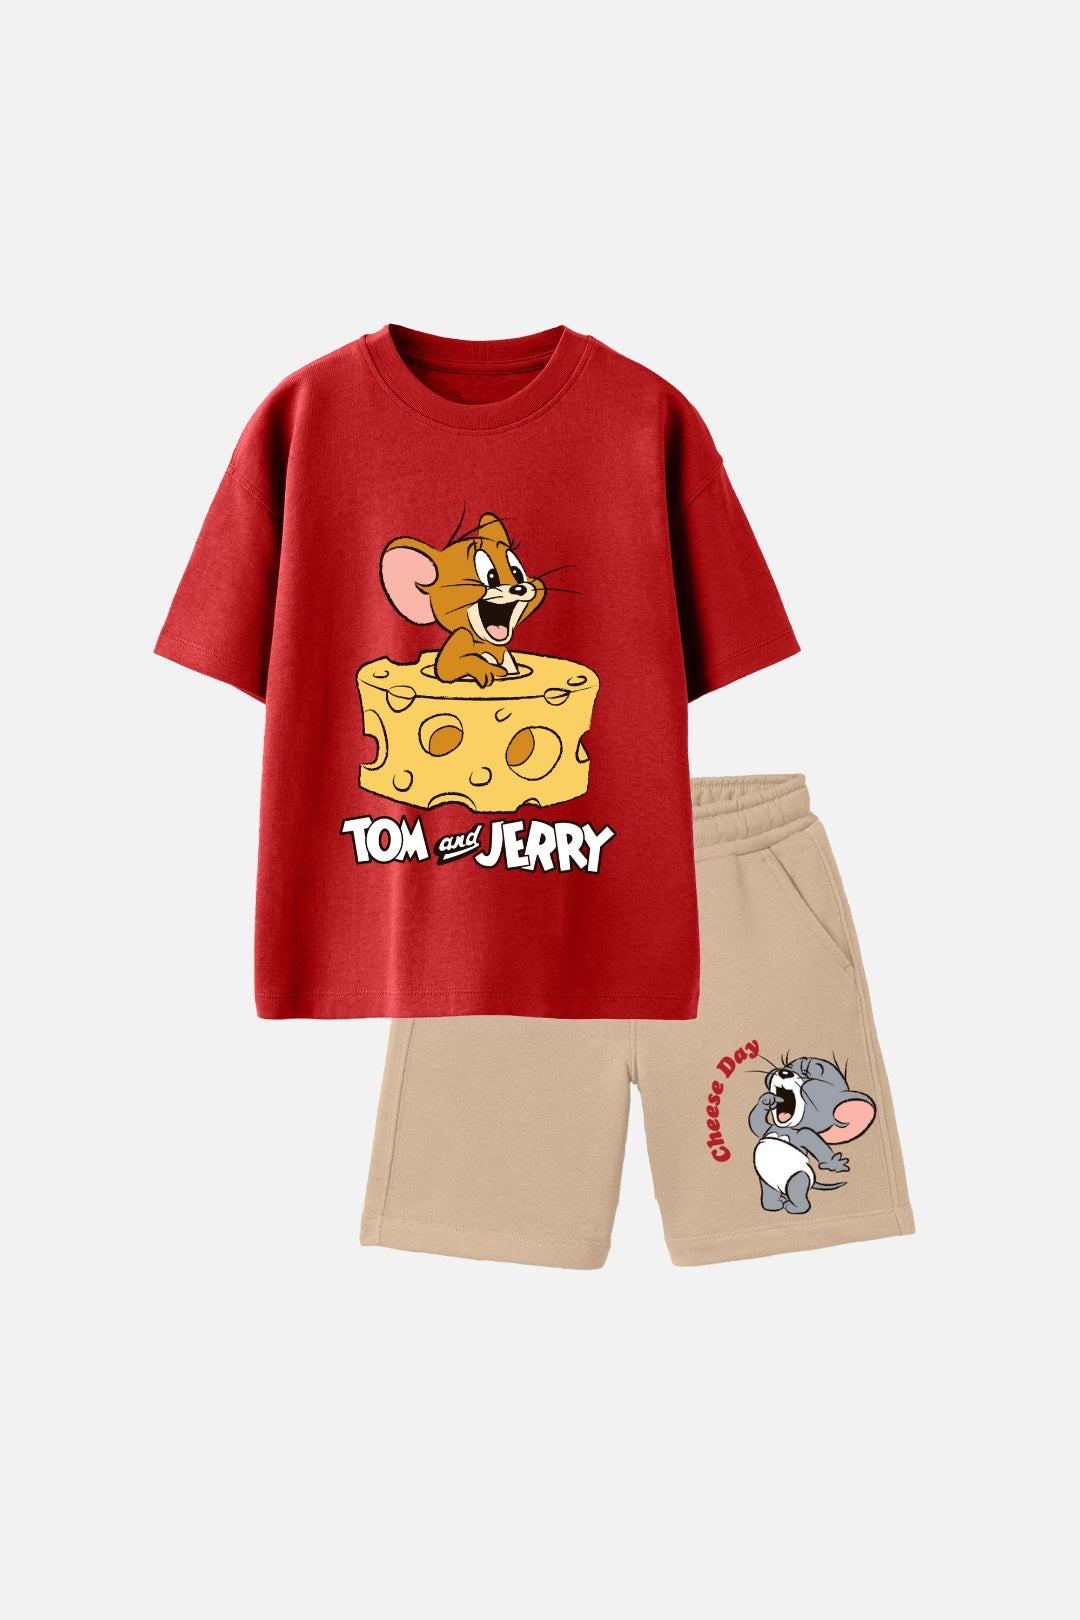 Tom and Jerry Classic cheese Shorts Set